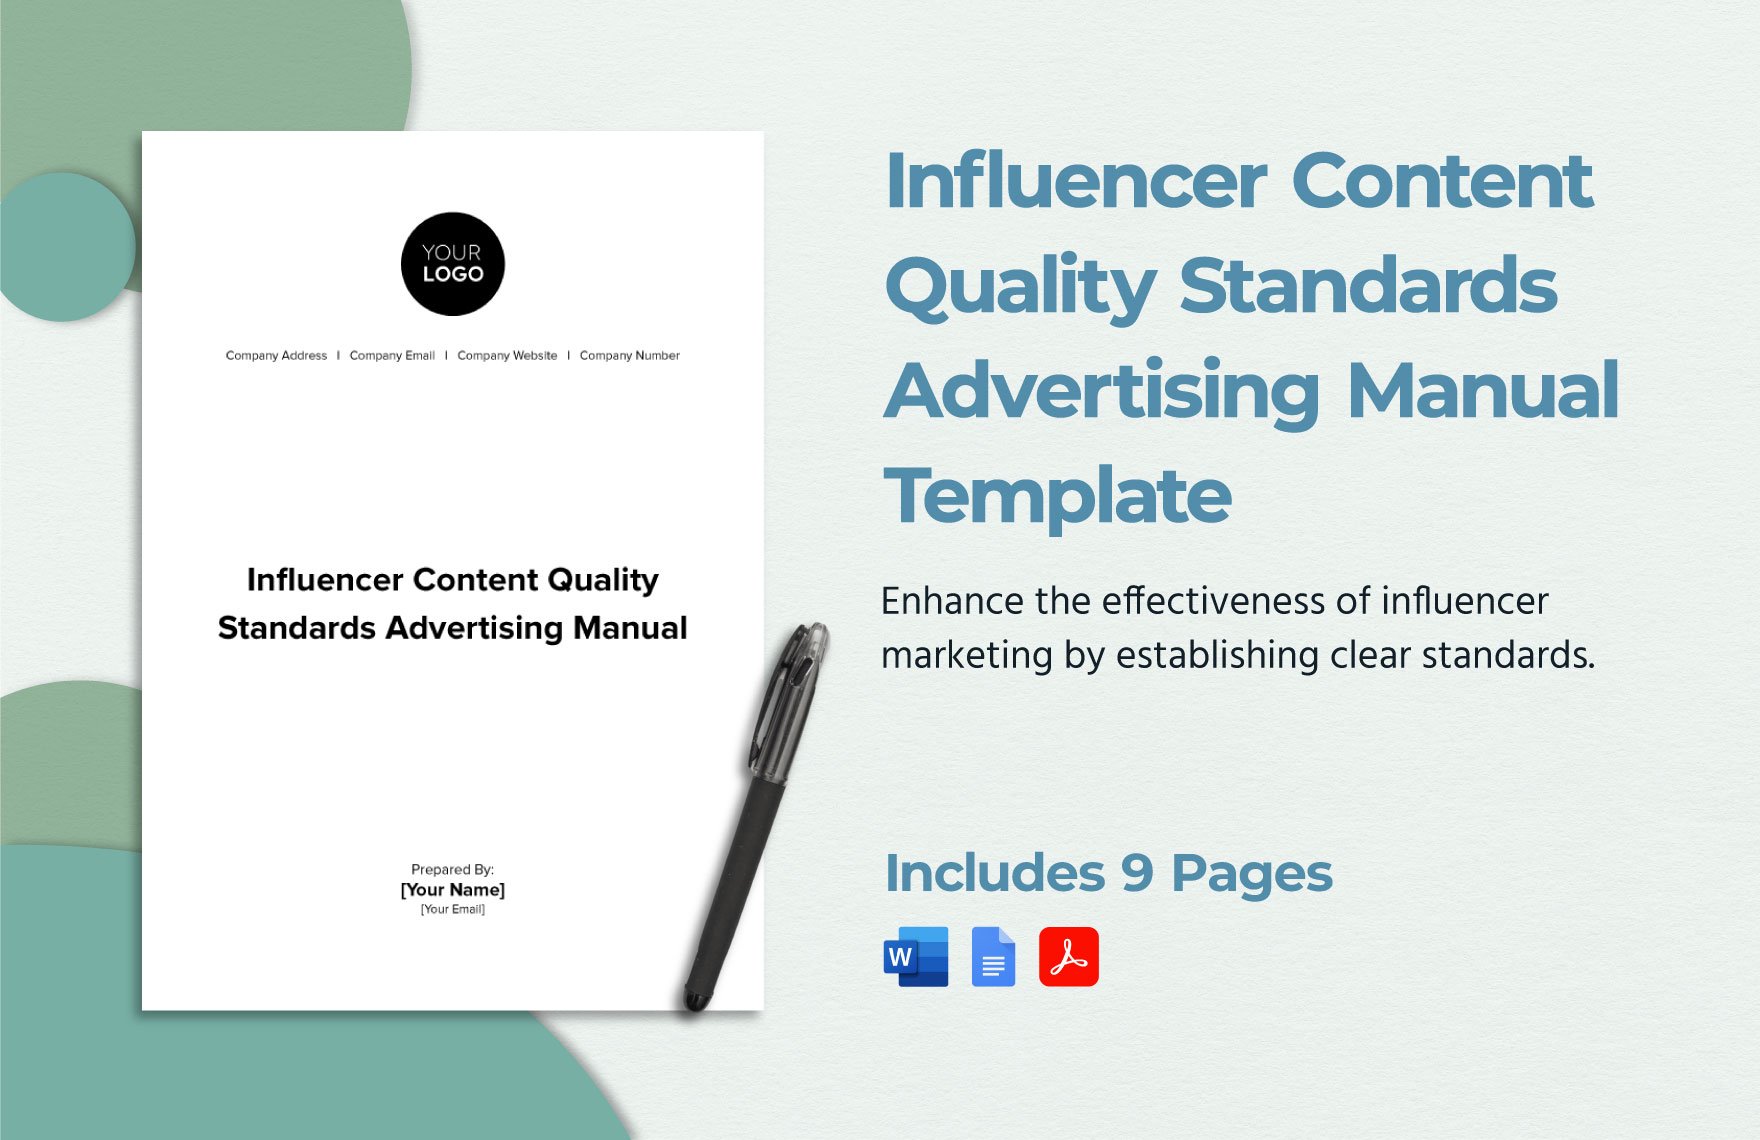 Influencer Content Quality Standards Advertising Manual Template in Word, Google Docs, PDF